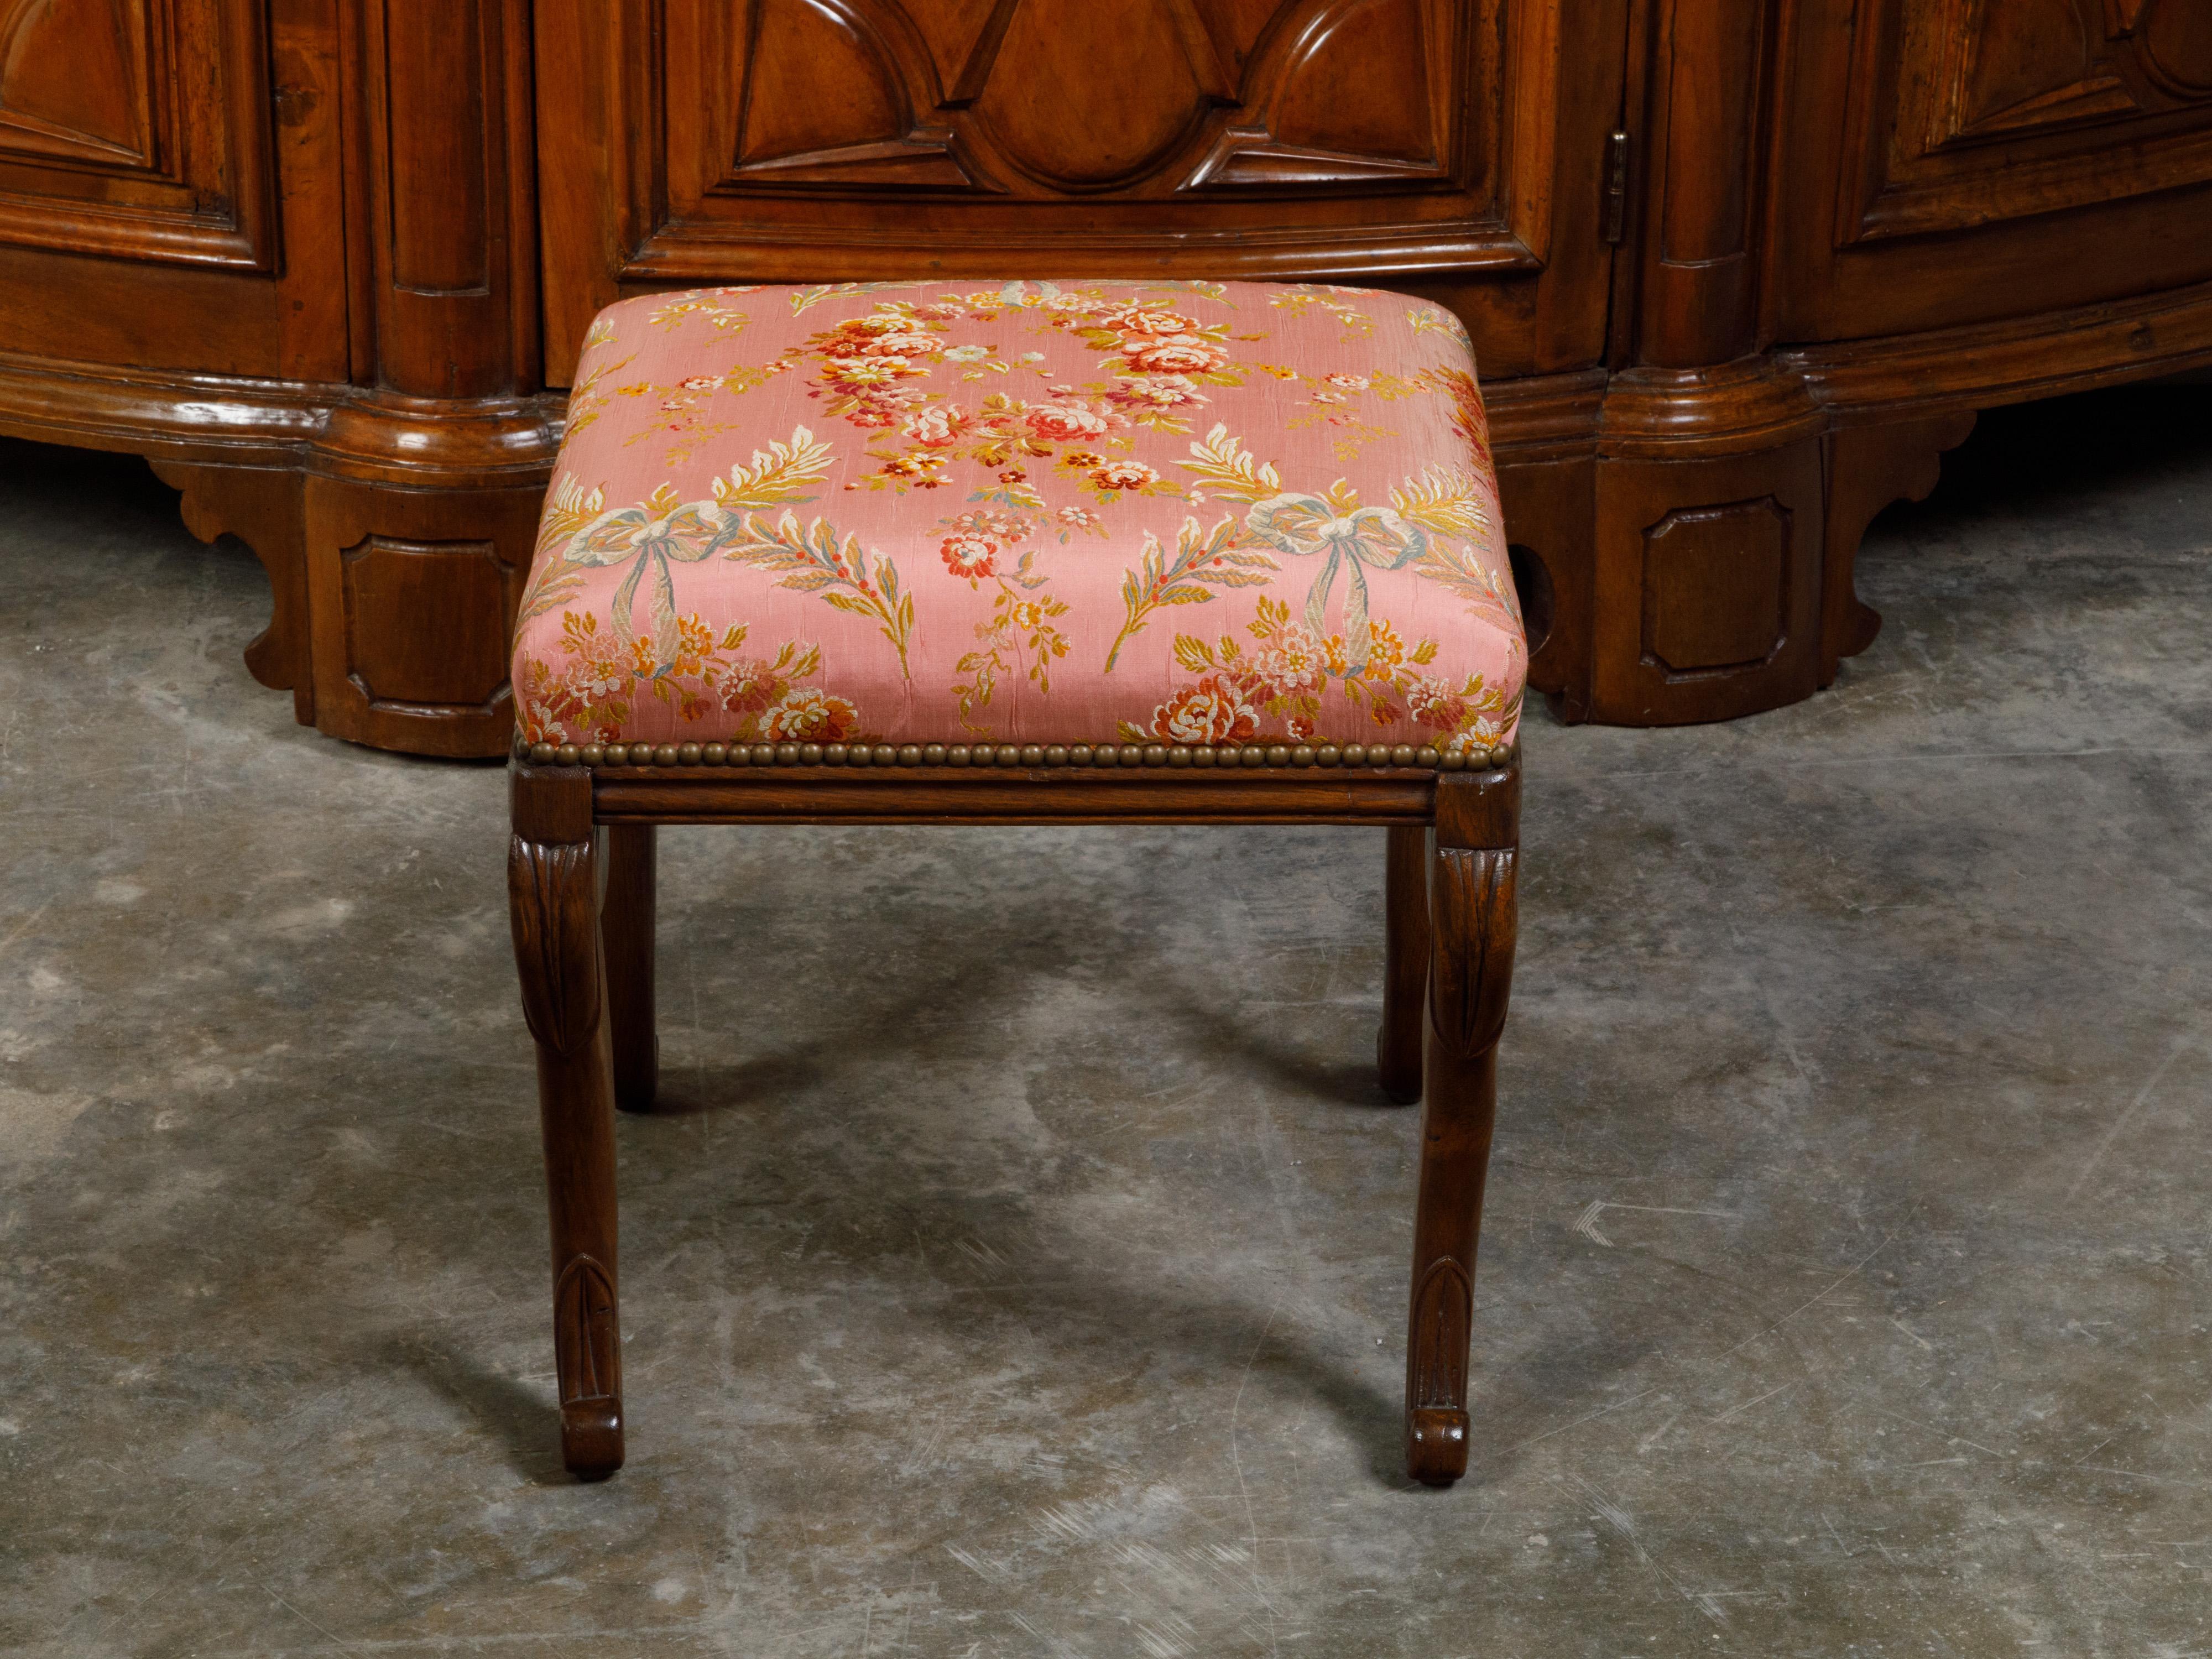 An English Regency period mahogany stool from the early 19th century, with cabriole legs and floral upholstery. Created in England during the first quarter of the 19th century, this mahogany stool attracts our attention with its square pink